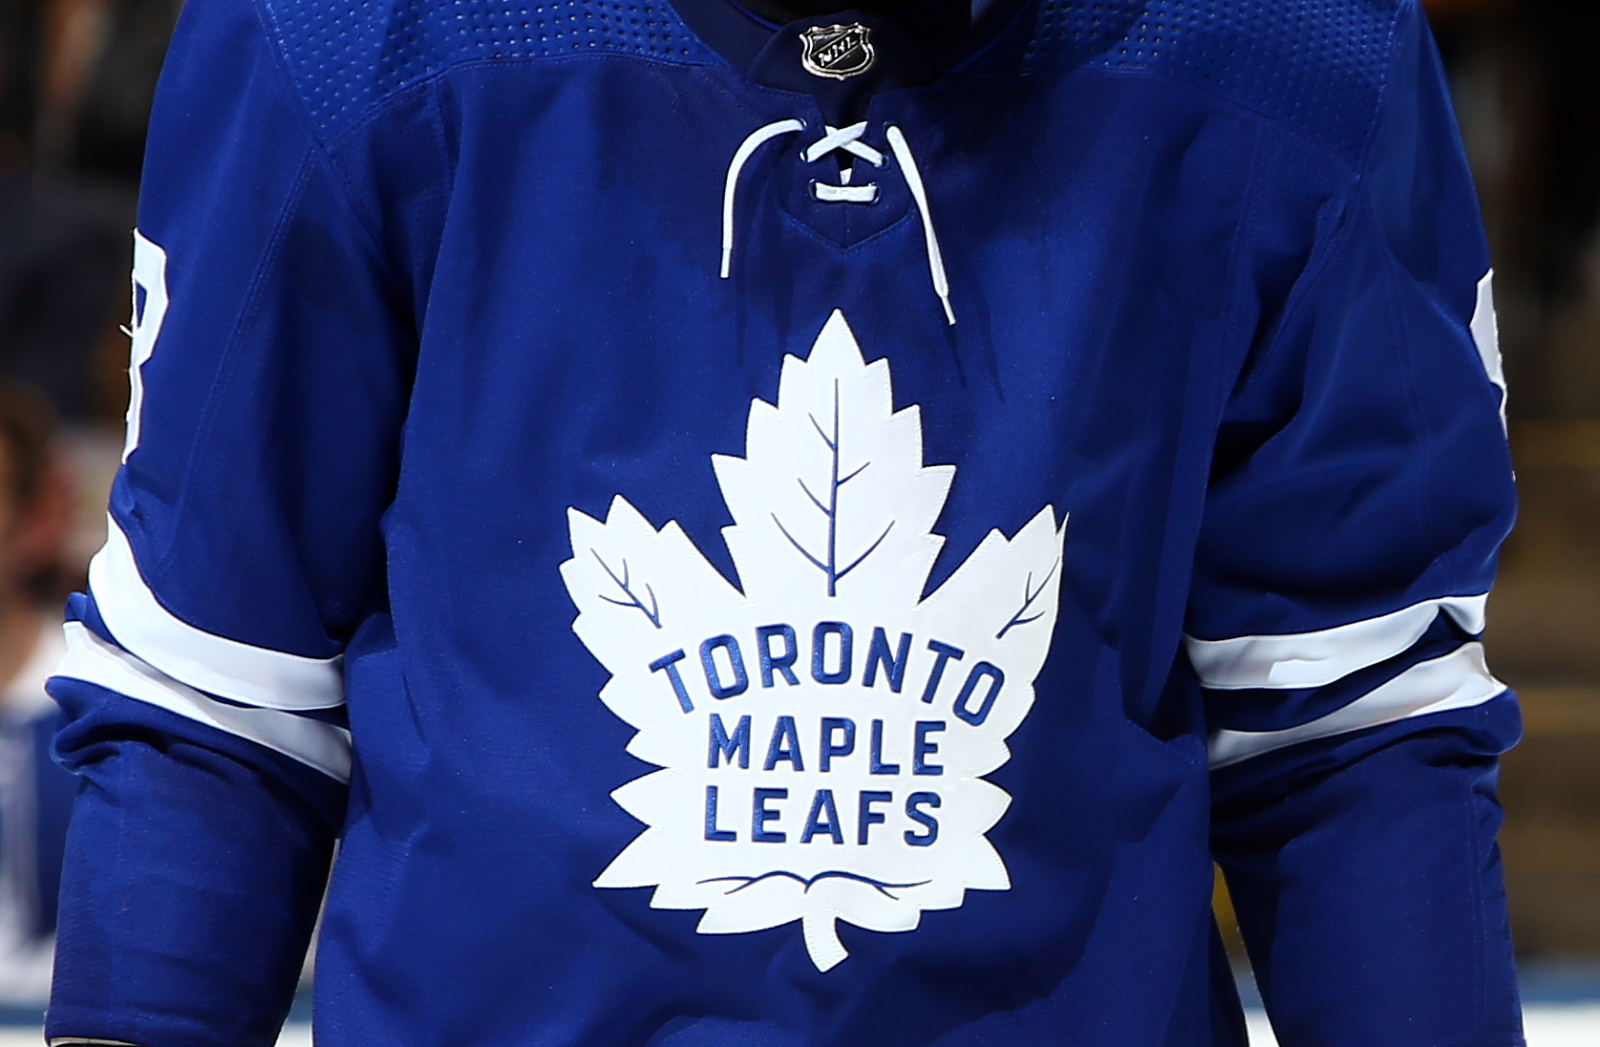 Toronto Maple Leafs on X: Woven from the fabric of legends. Introducing  the #LeafsForever adidas #ReverseRetro jersey. Hitting the ice in 2021.   / X